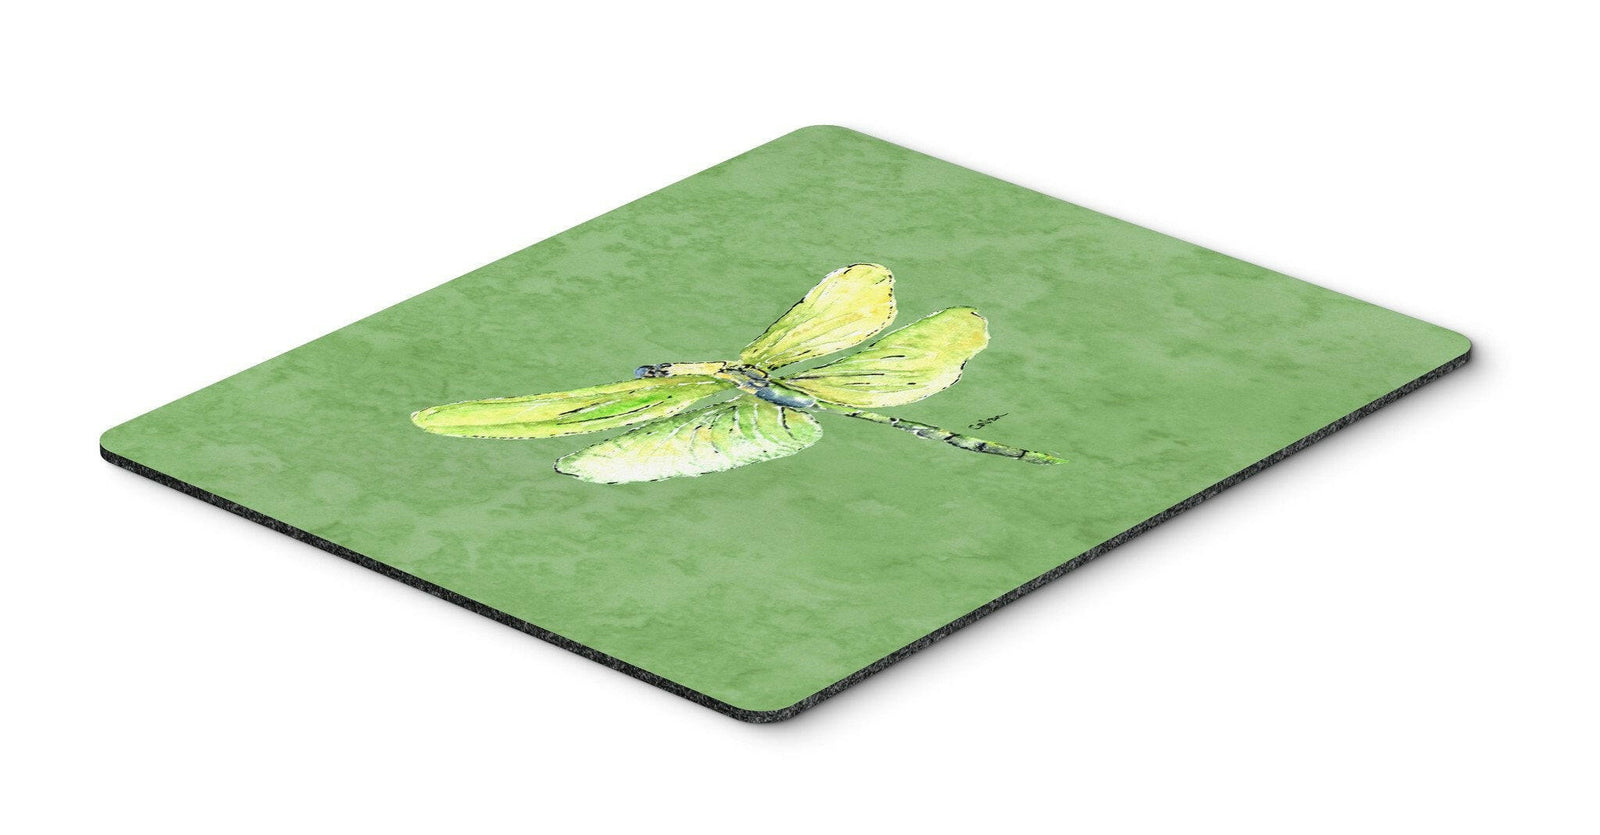 Dragonfly on Avacado Mouse Pad, Hot Pad or Trivet by Caroline's Treasures